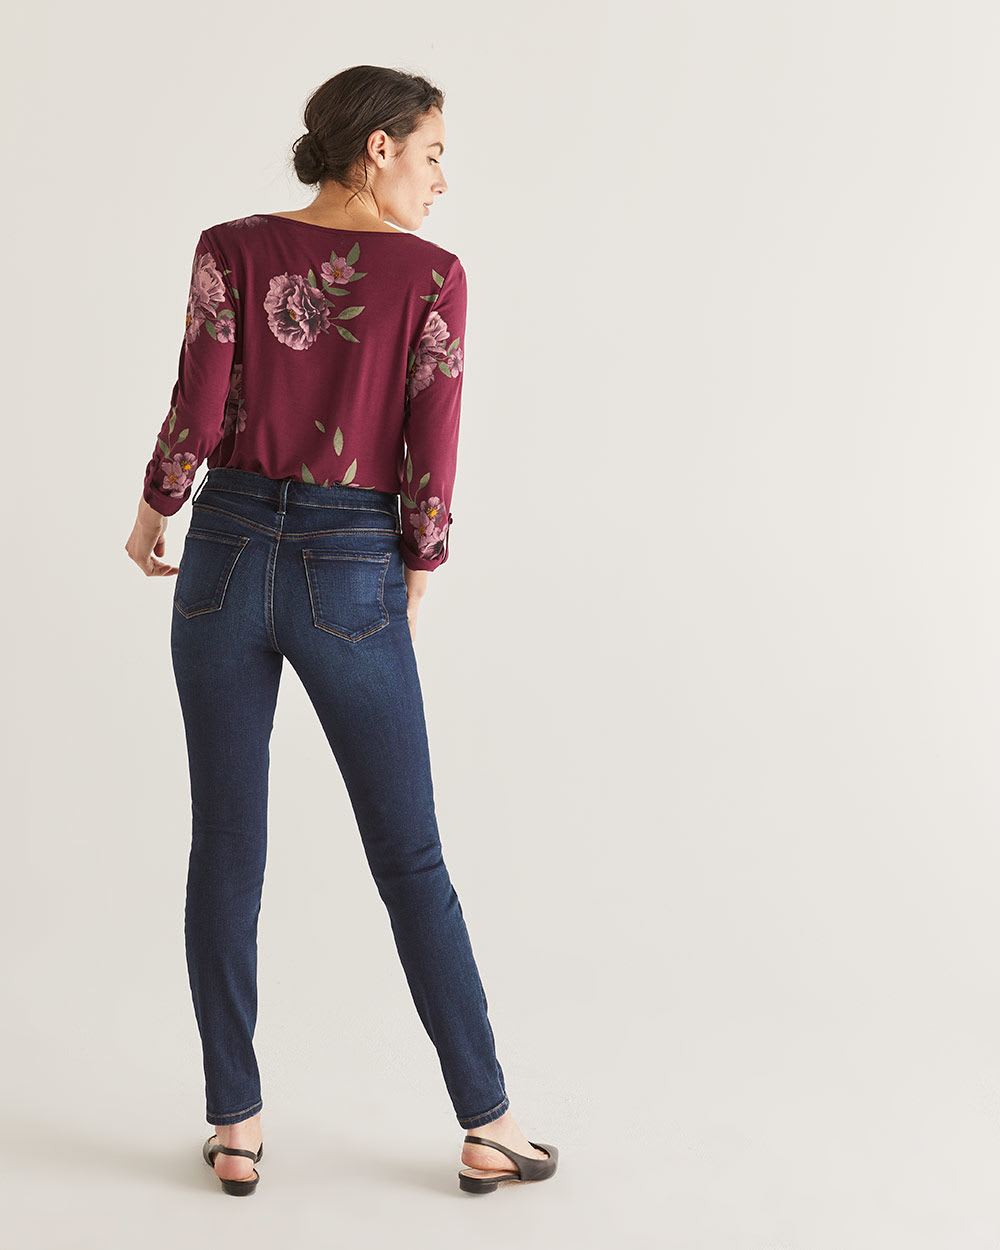 The Insider Skinny Jeans - Tall